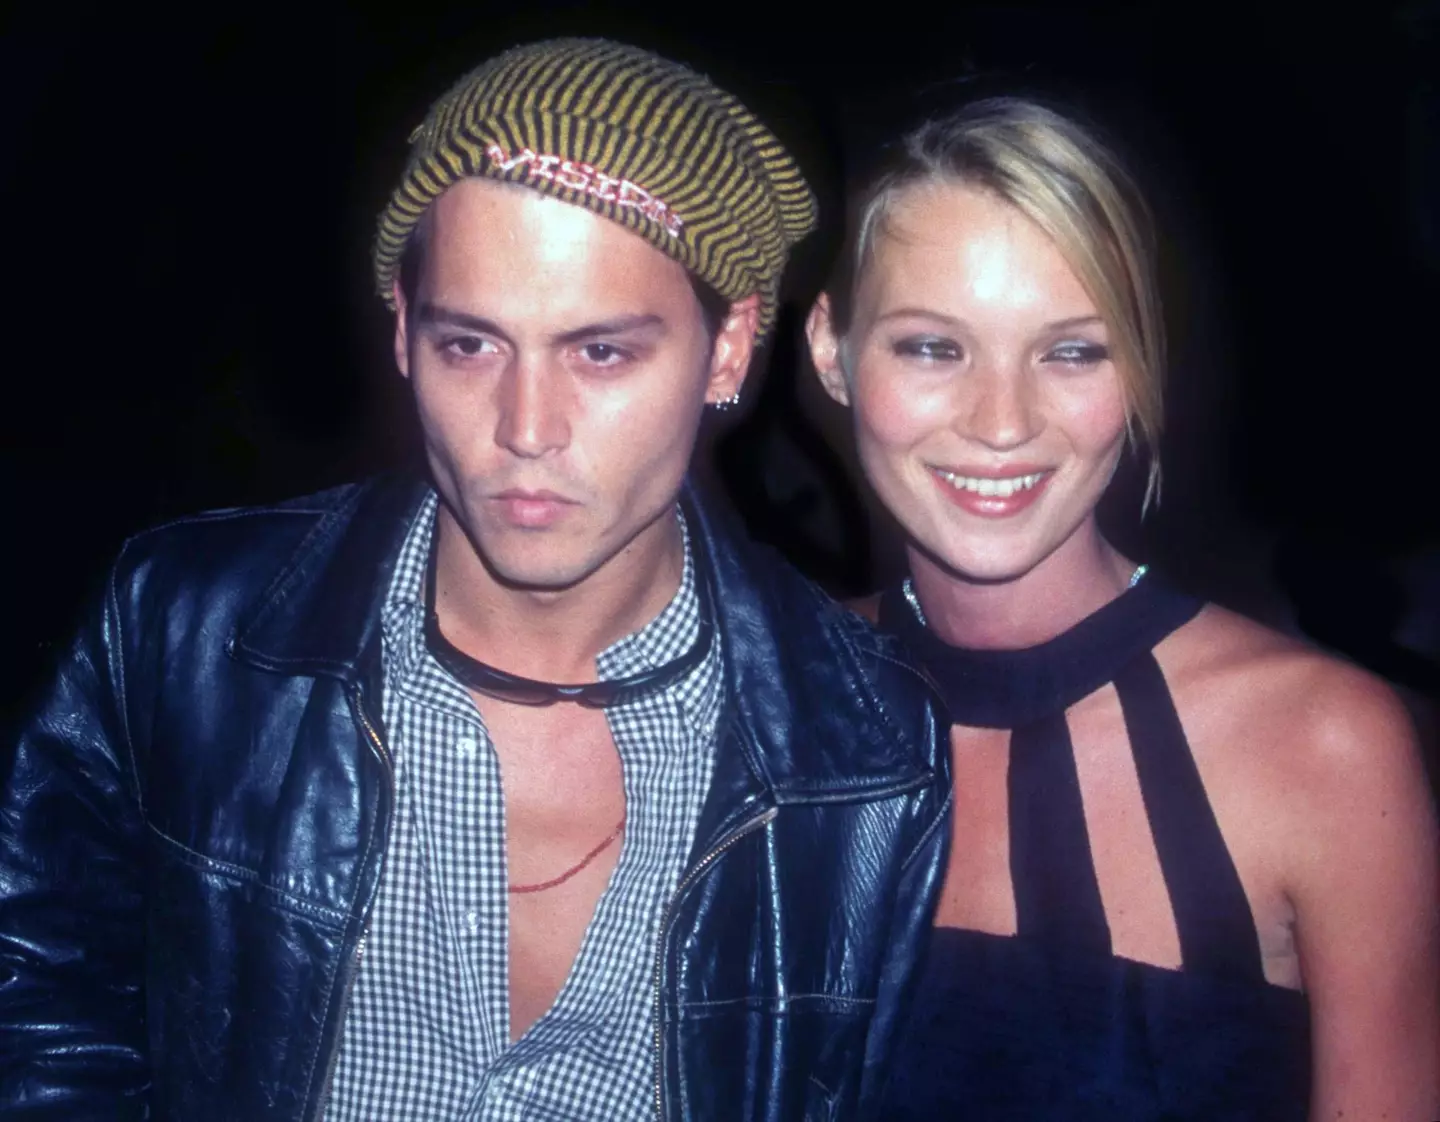 Johnny Depp and Kate Moss in 1995. Credit Alamy